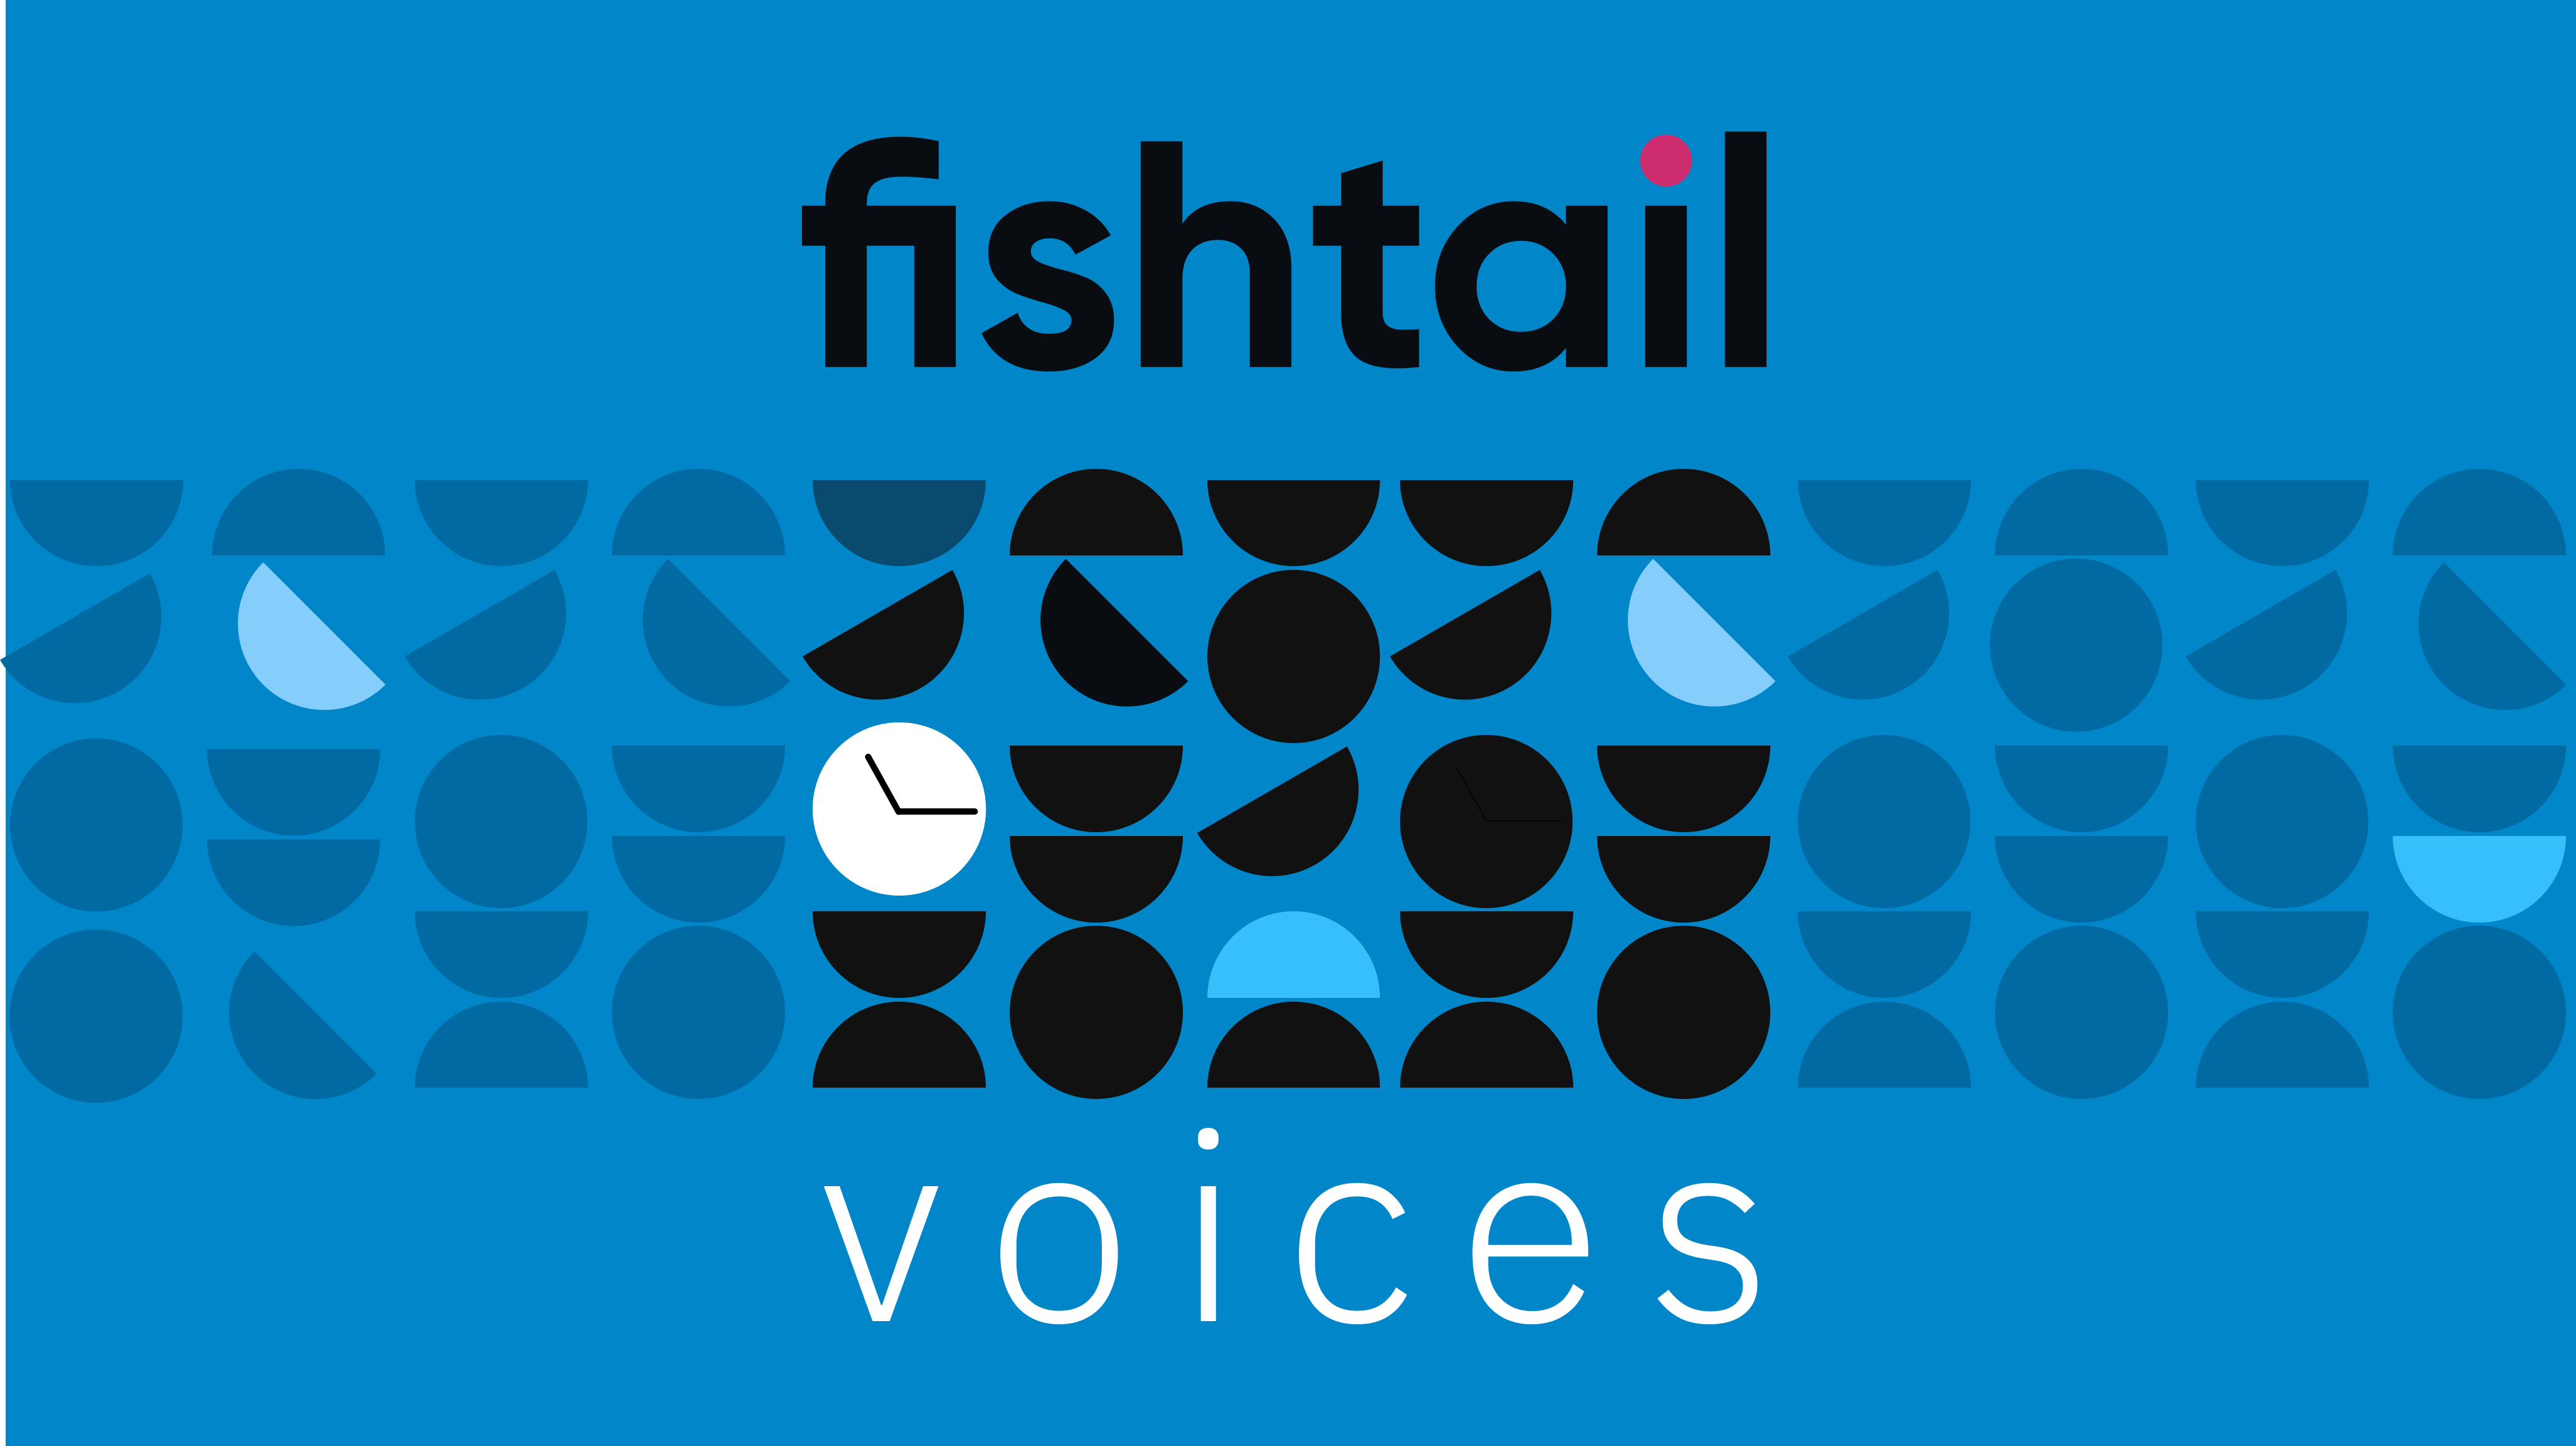 fishtail voices - cover for the videos